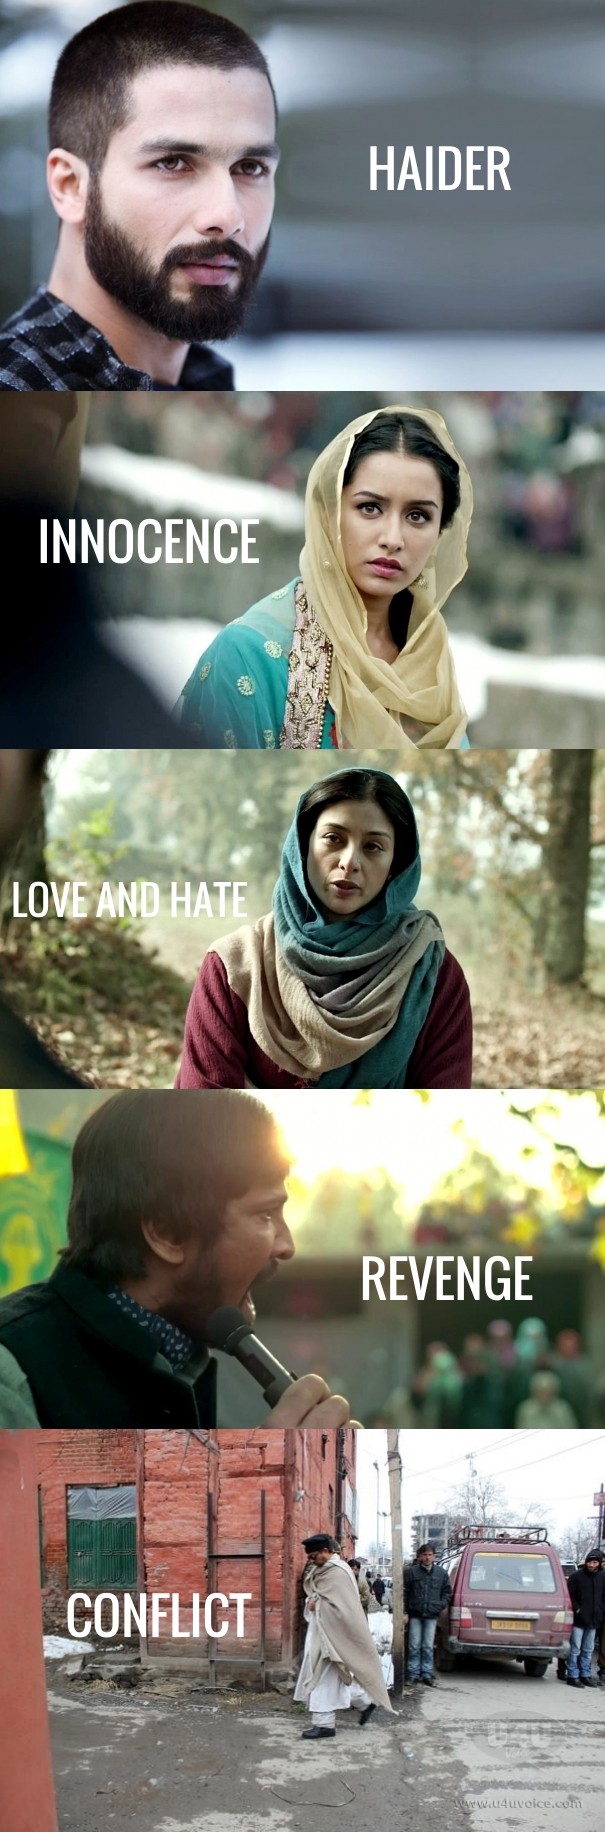 Haider innocence love and hate Design 